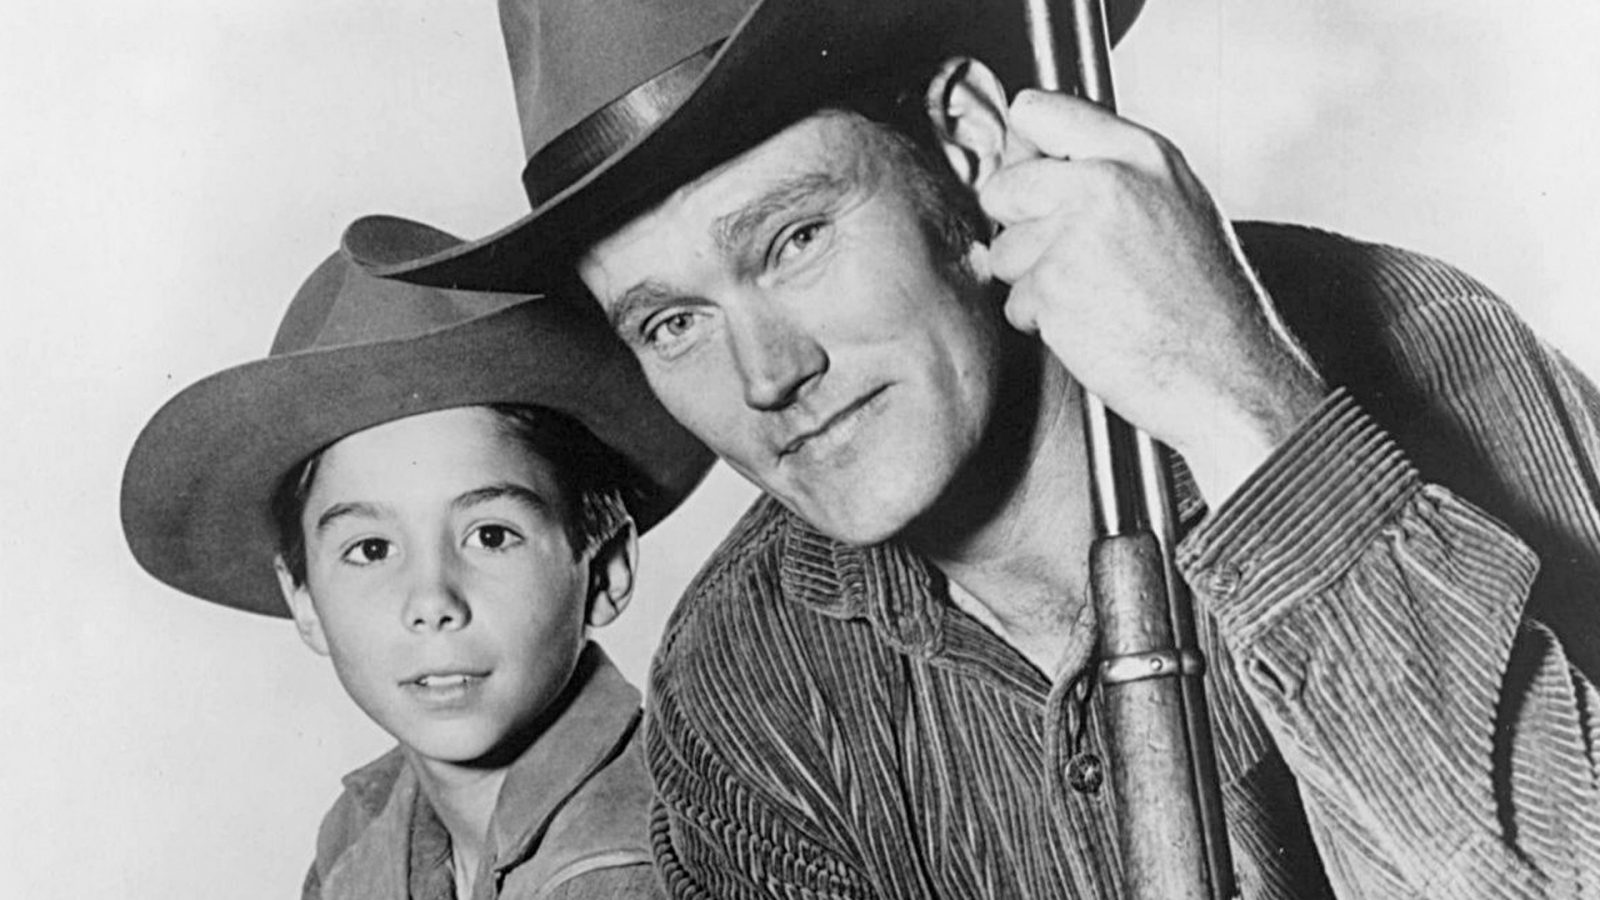 If You Know 15/20 of These Classic TV Shows, Then You Must’ve Owned a Black and White TV The Rifleman